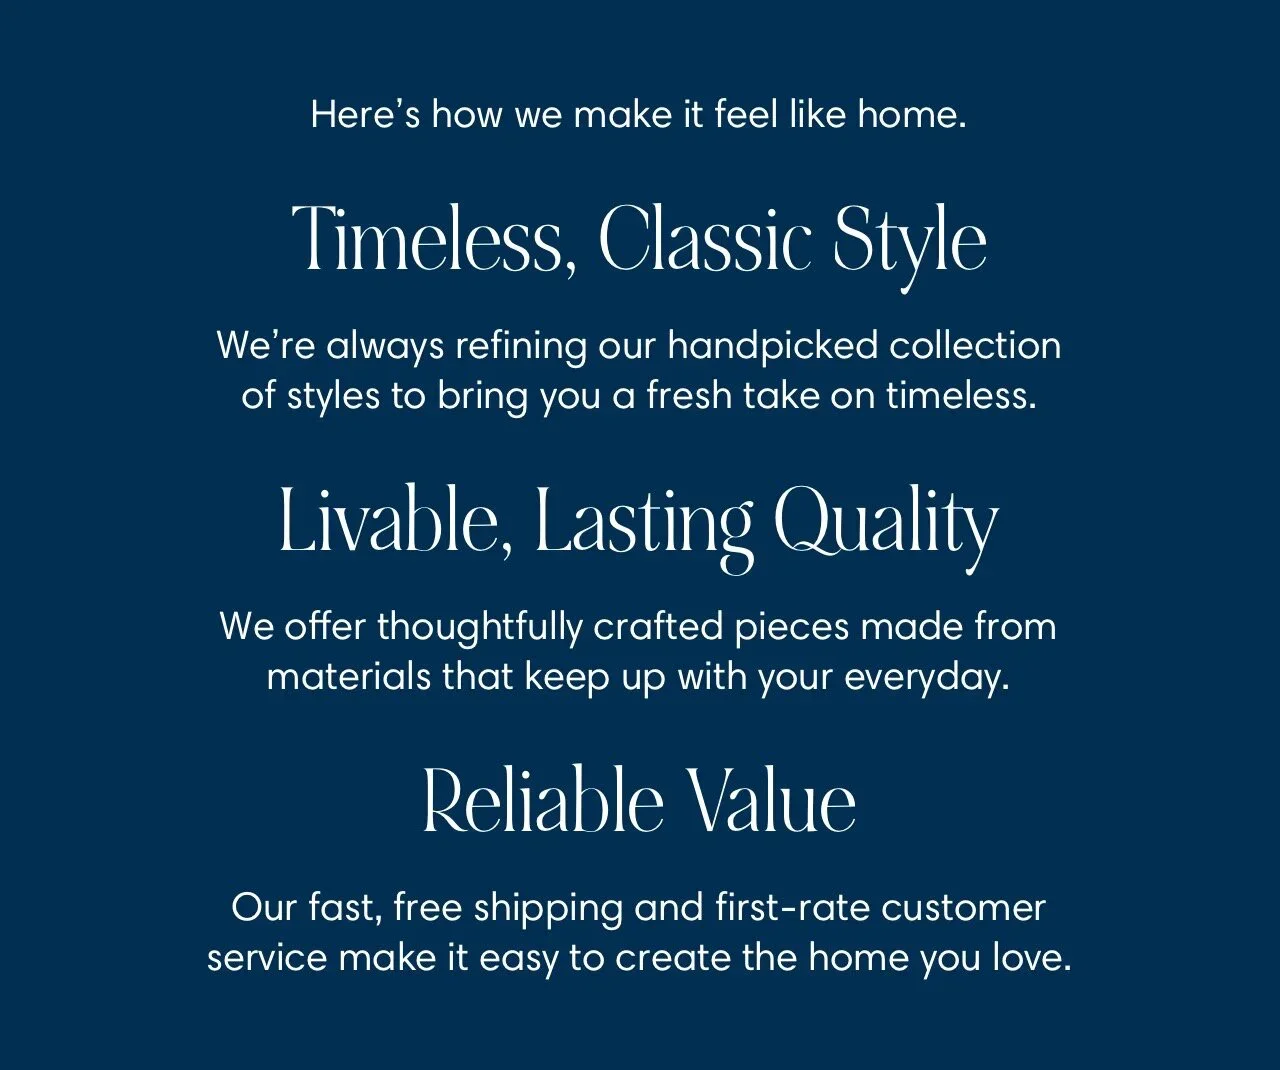 Here's how we make it feel like home: Timeless, Classic Style; Livable, Lasting Quality; Reliable Value